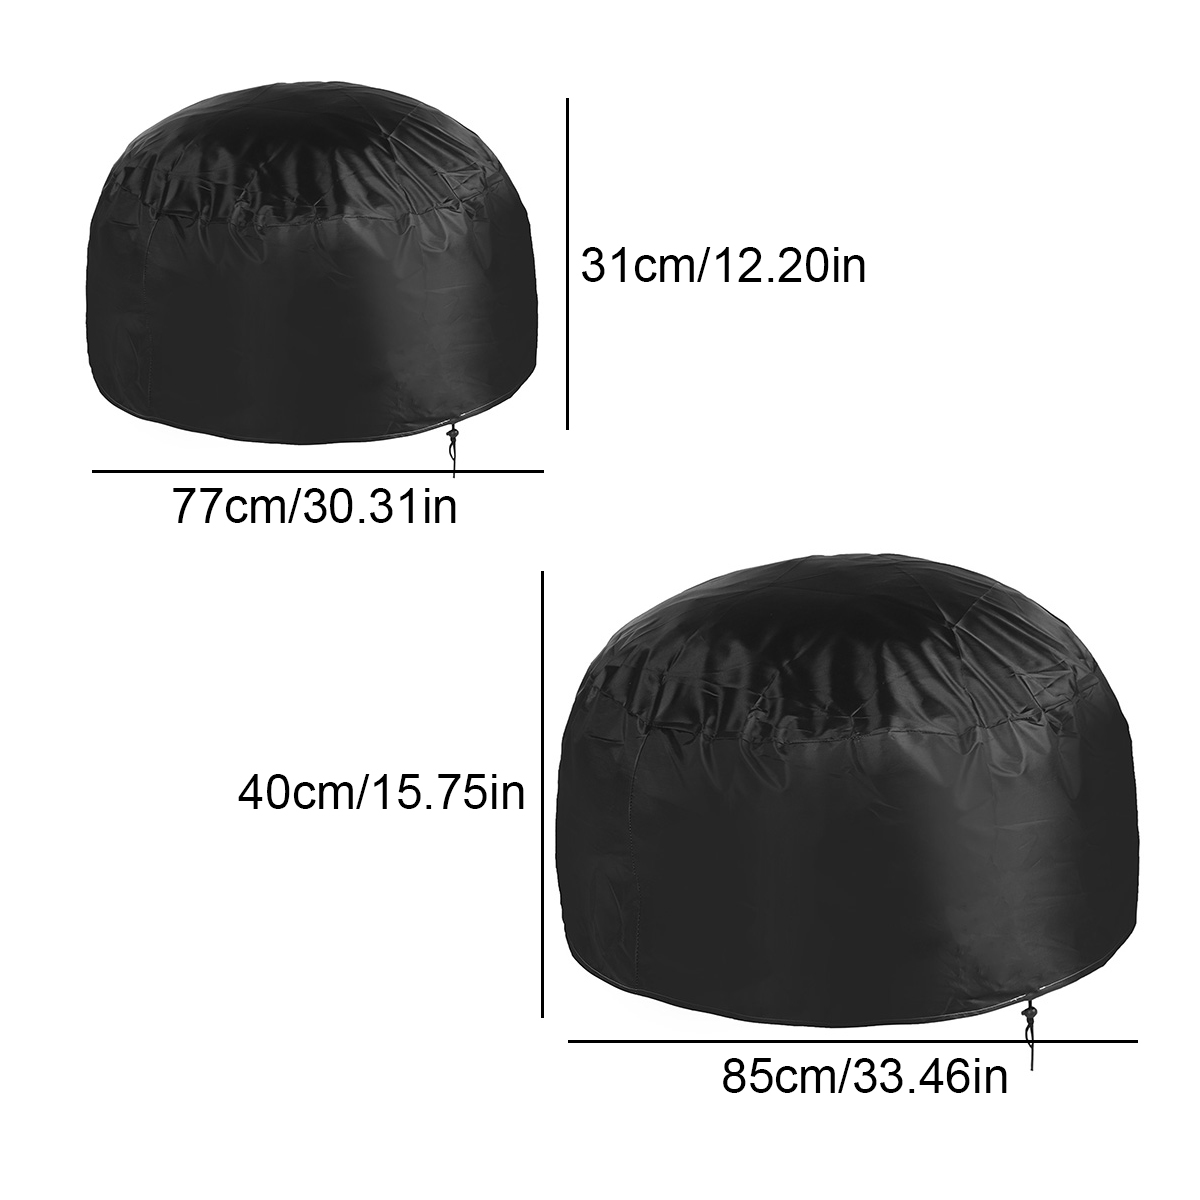 BBQ-Gill-Cover-Waterproof-UV-Protector-Gas-Charcoal-Burner-Round-Cover-Outdoor-Camping-Picnic-1779888-2